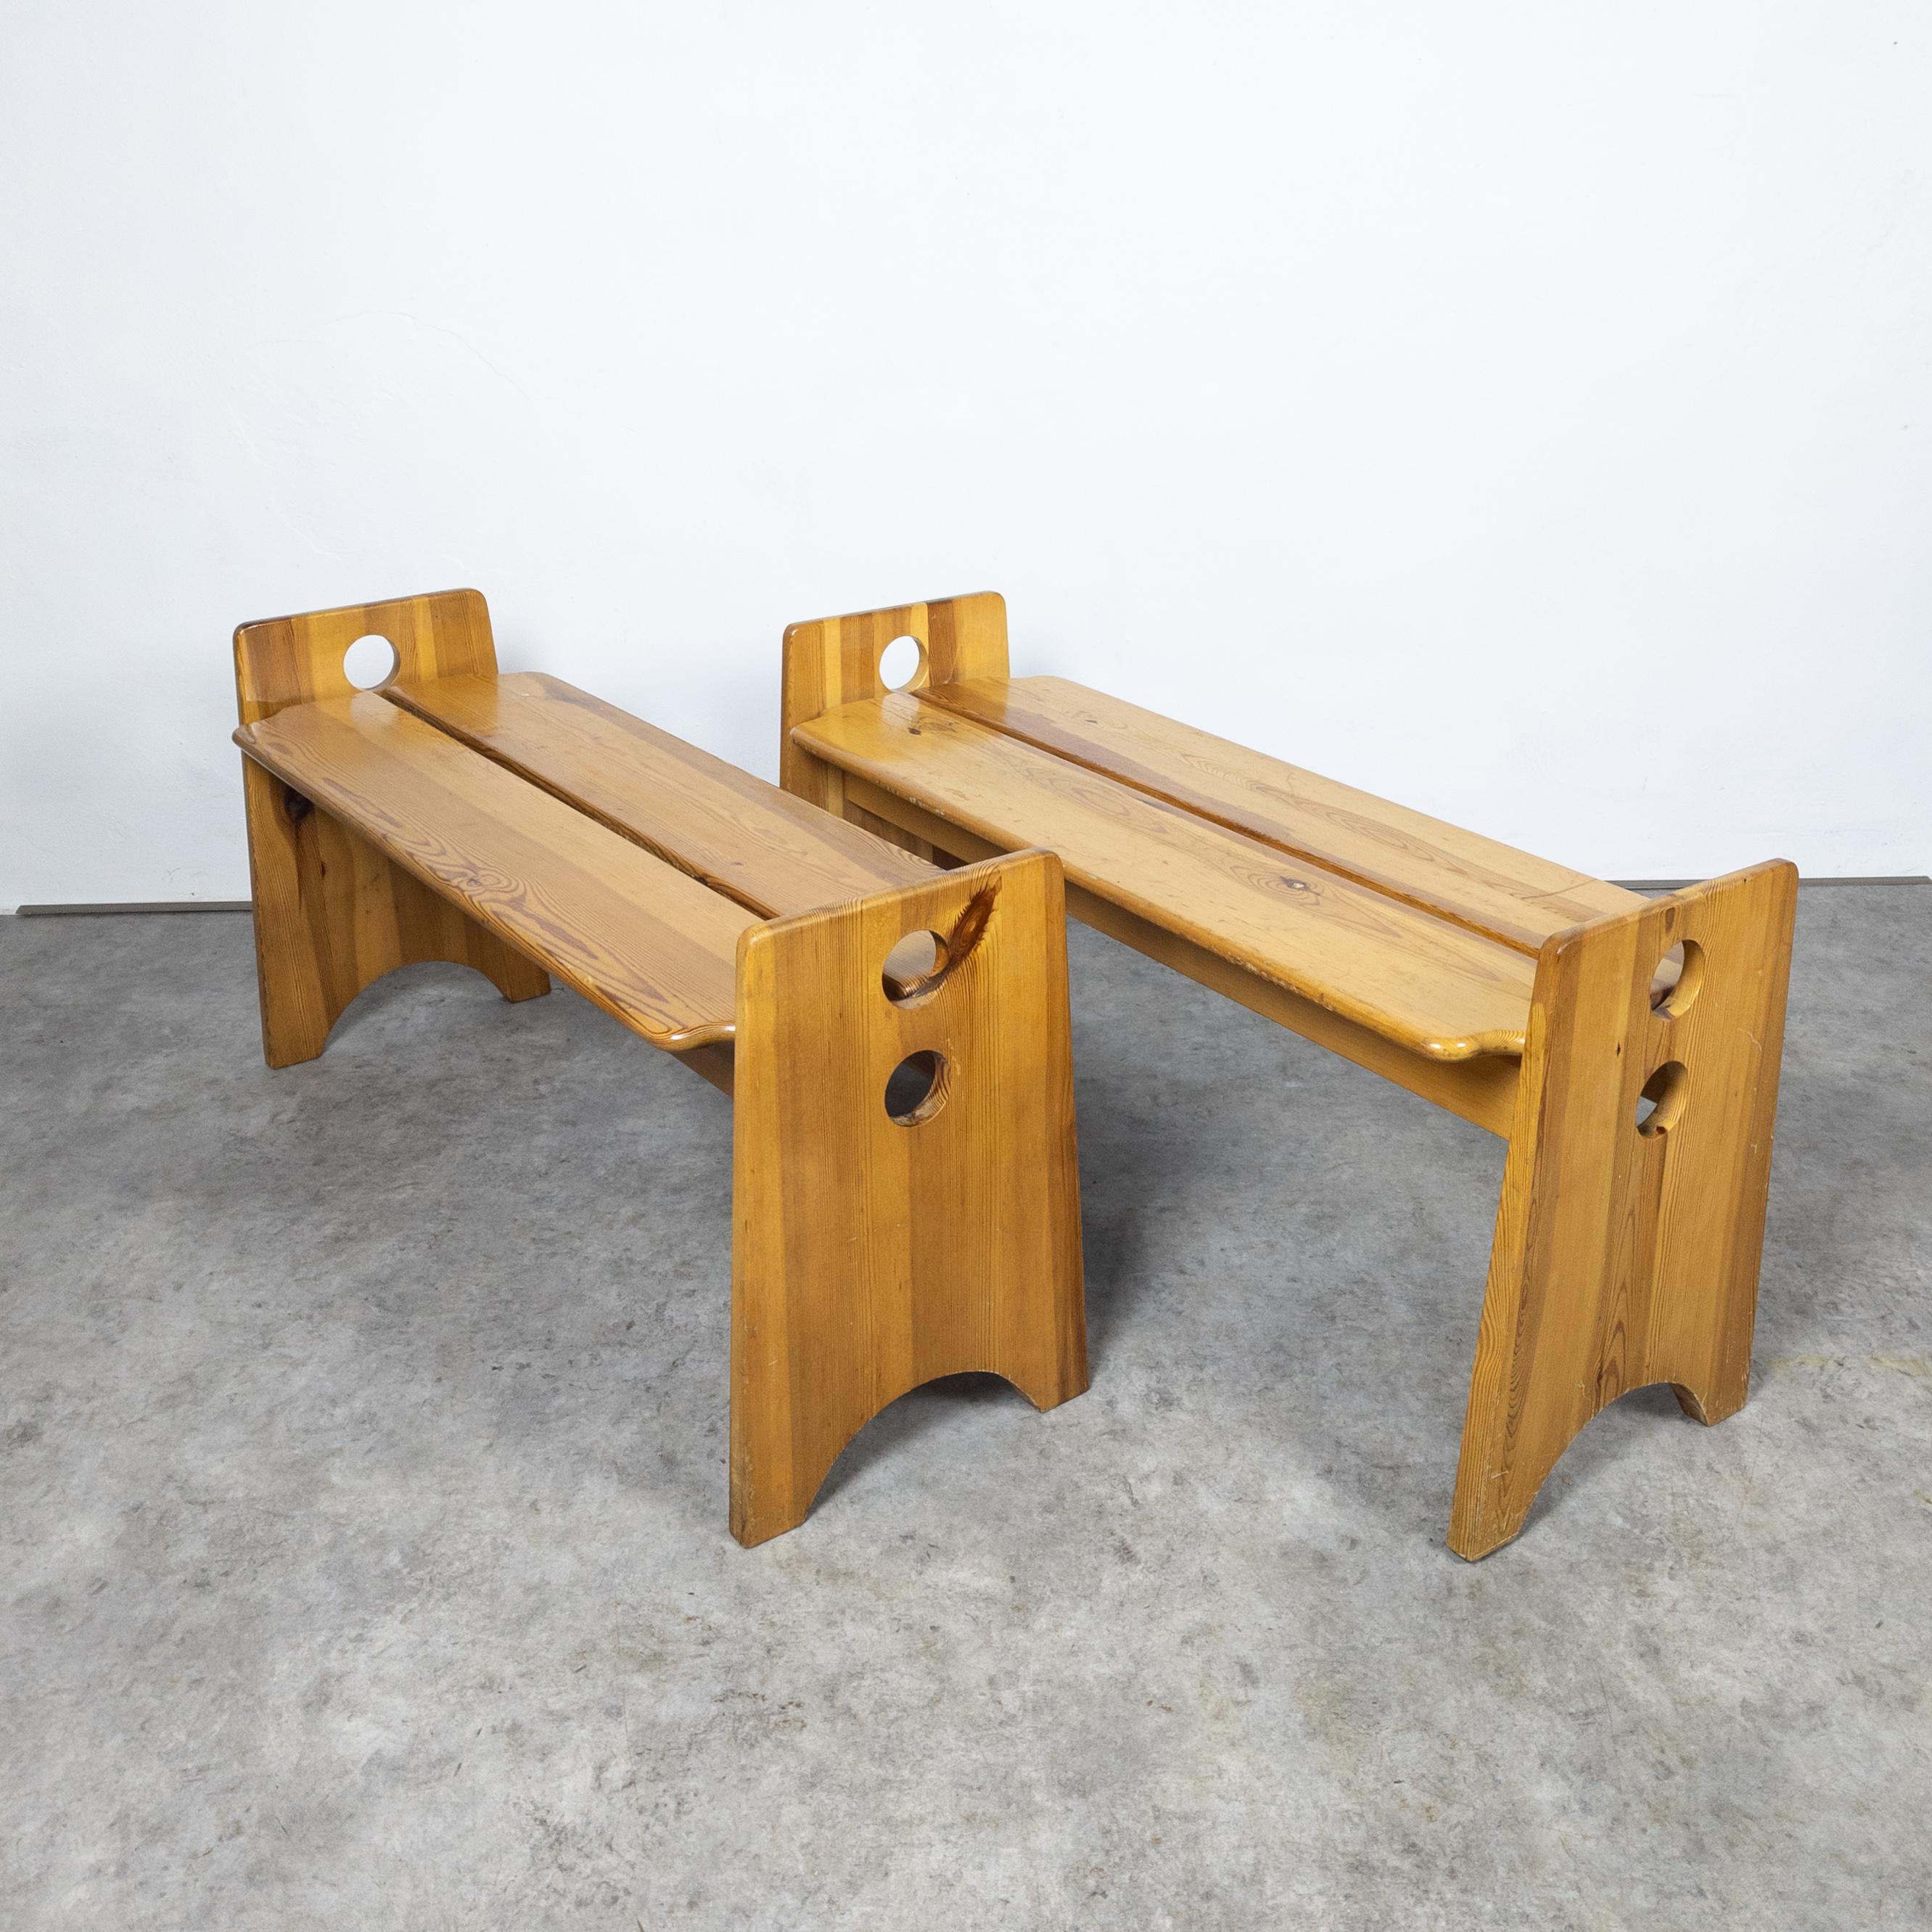 Pine Pair of solid pine sculptural benches by Gilbert Marklund for Furusnickarn AB 